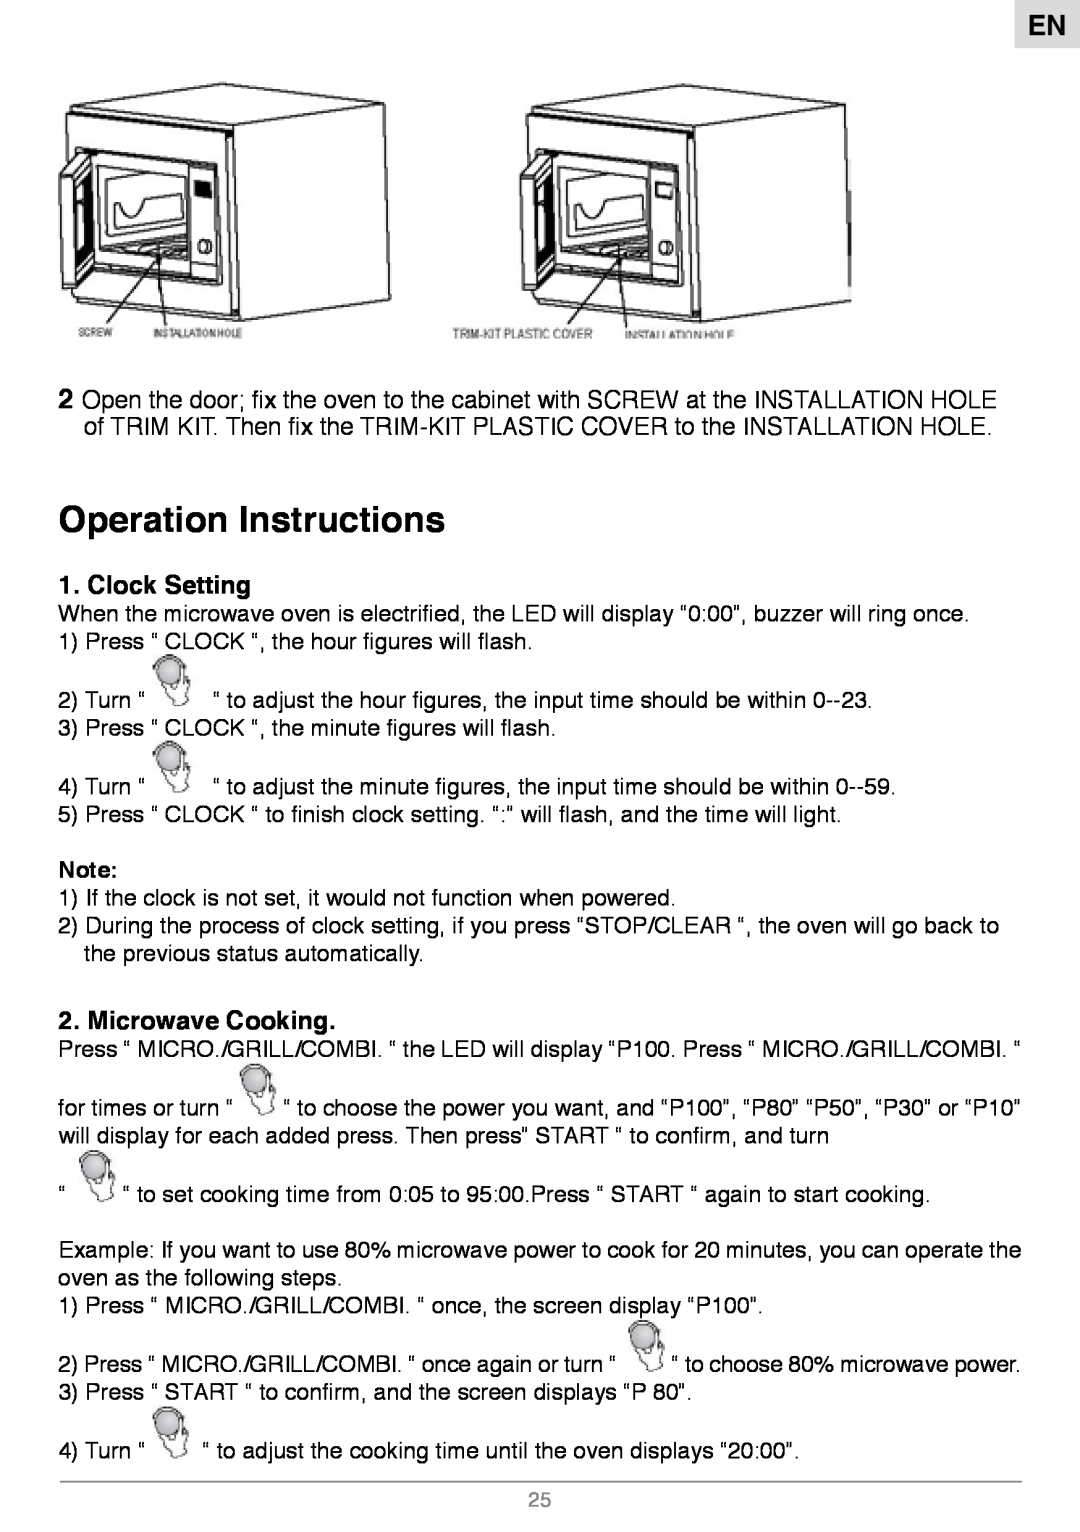 Foster S1000 manual Operation Instructions, Clock Setting, Microwave Cooking 